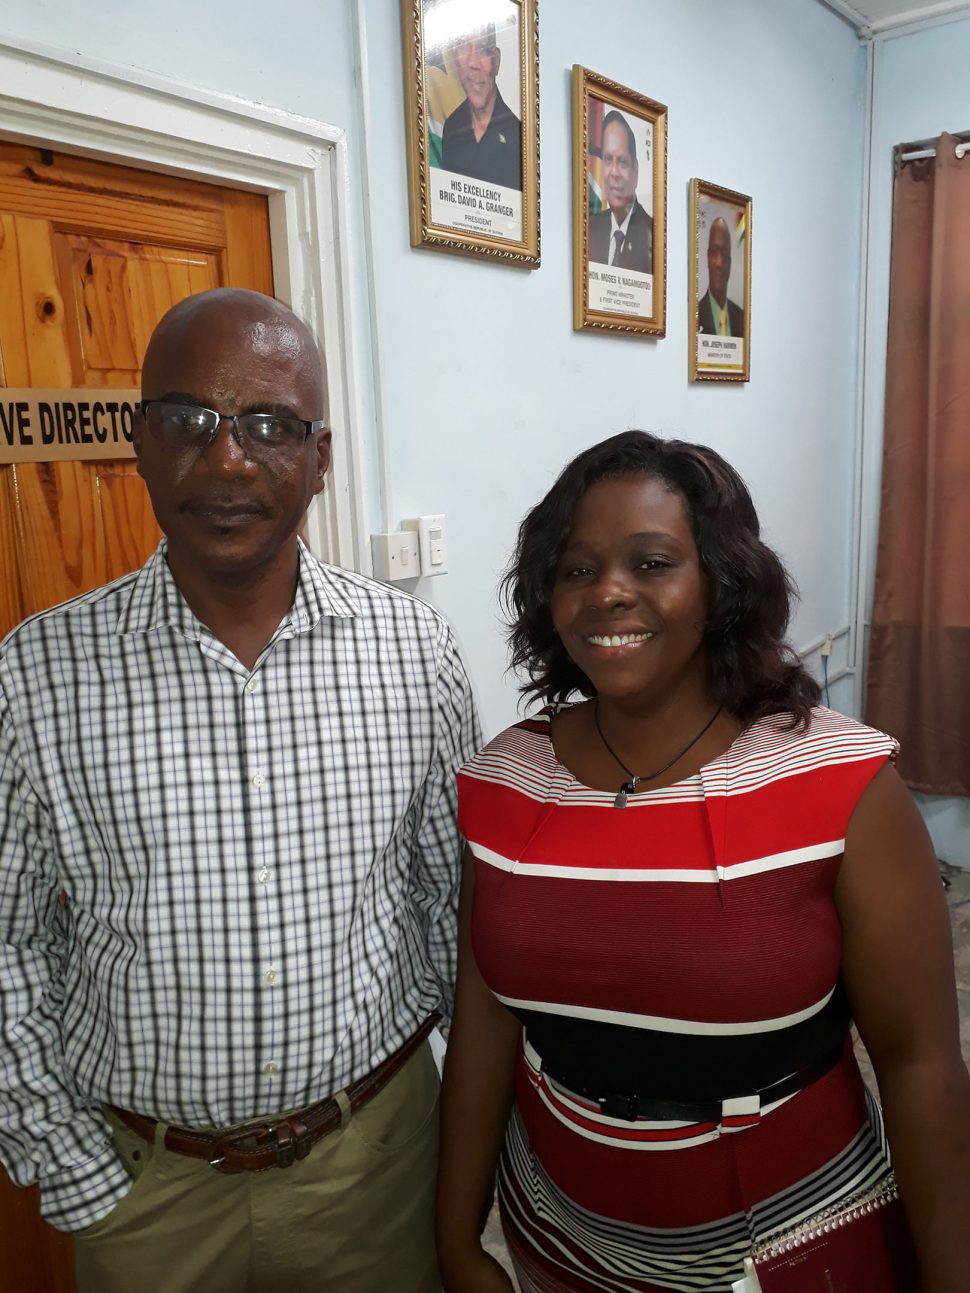 President of the Linden Chamber of Industry, Commerce and Development (LCICD) Victor Fernandes (left) and Linden Mayor Waneka Arrindell shortly after a meeting regarding the controversial ‘green’ project had ended. The meeting was held at the headquarters of the Environmental Protection Agency (EPA).